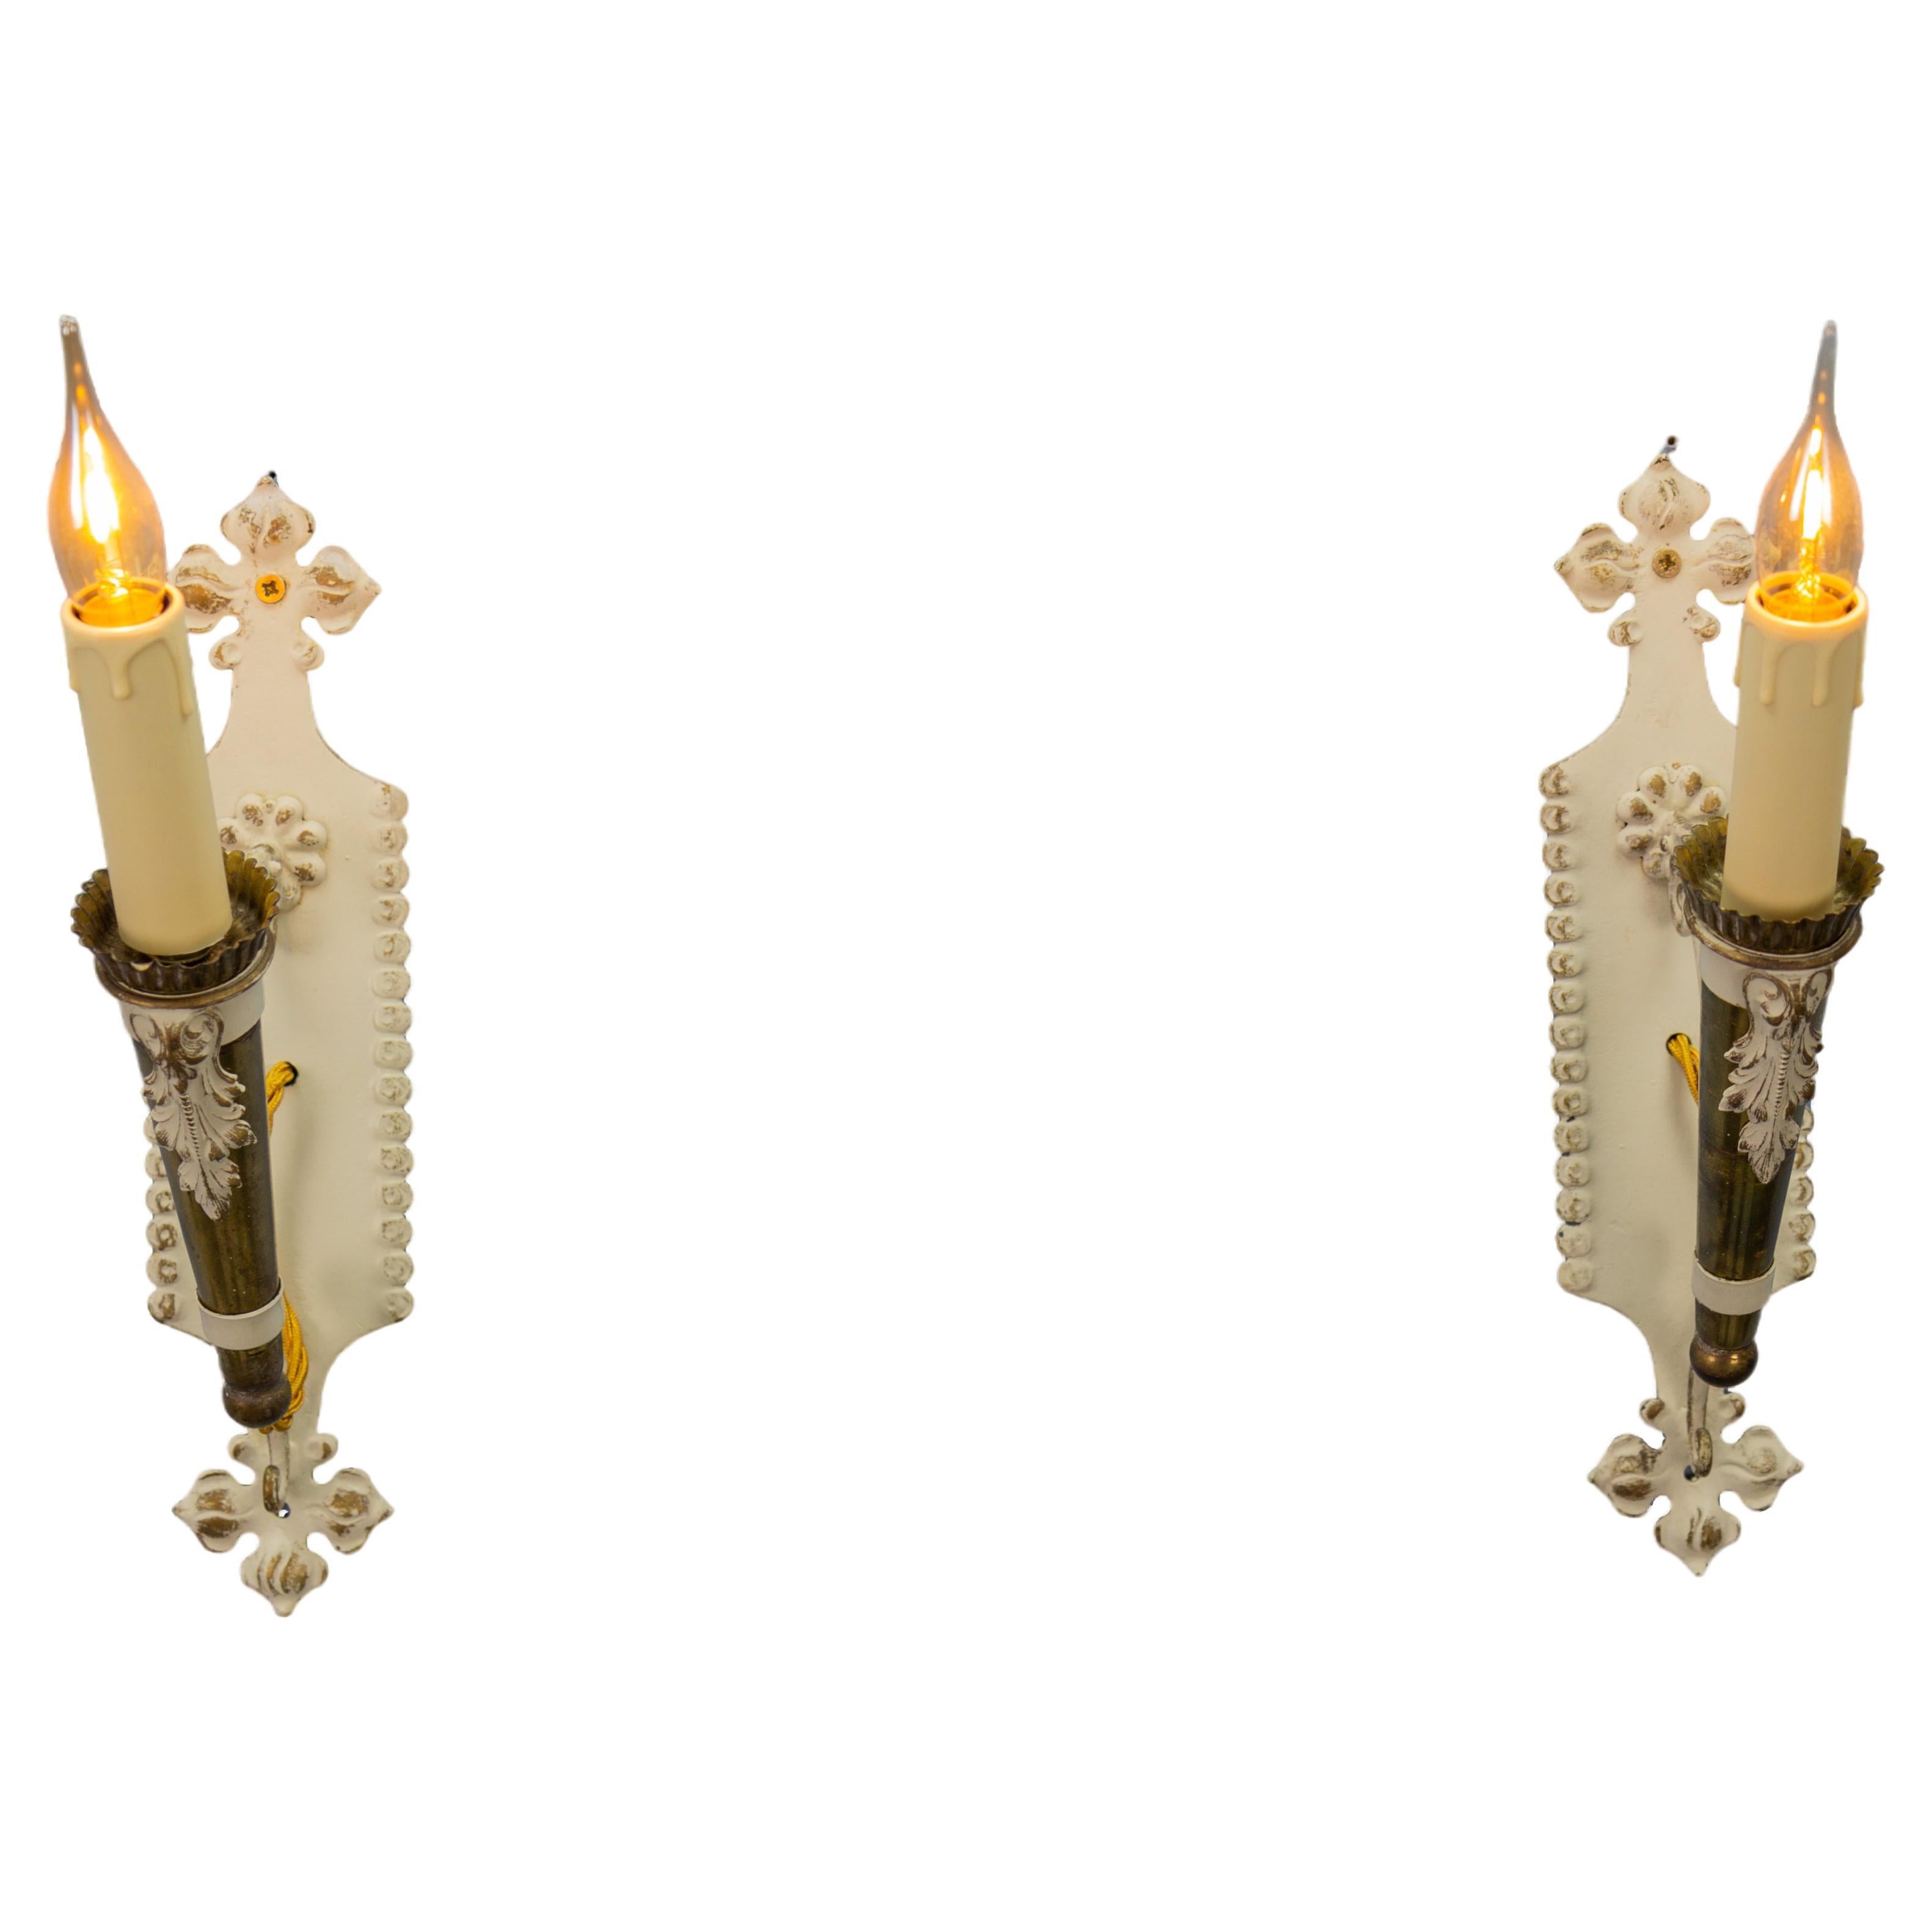 Pair of Italian Vintage White and Golden Metal Torch Shaped Wall Sconces, 1950s For Sale